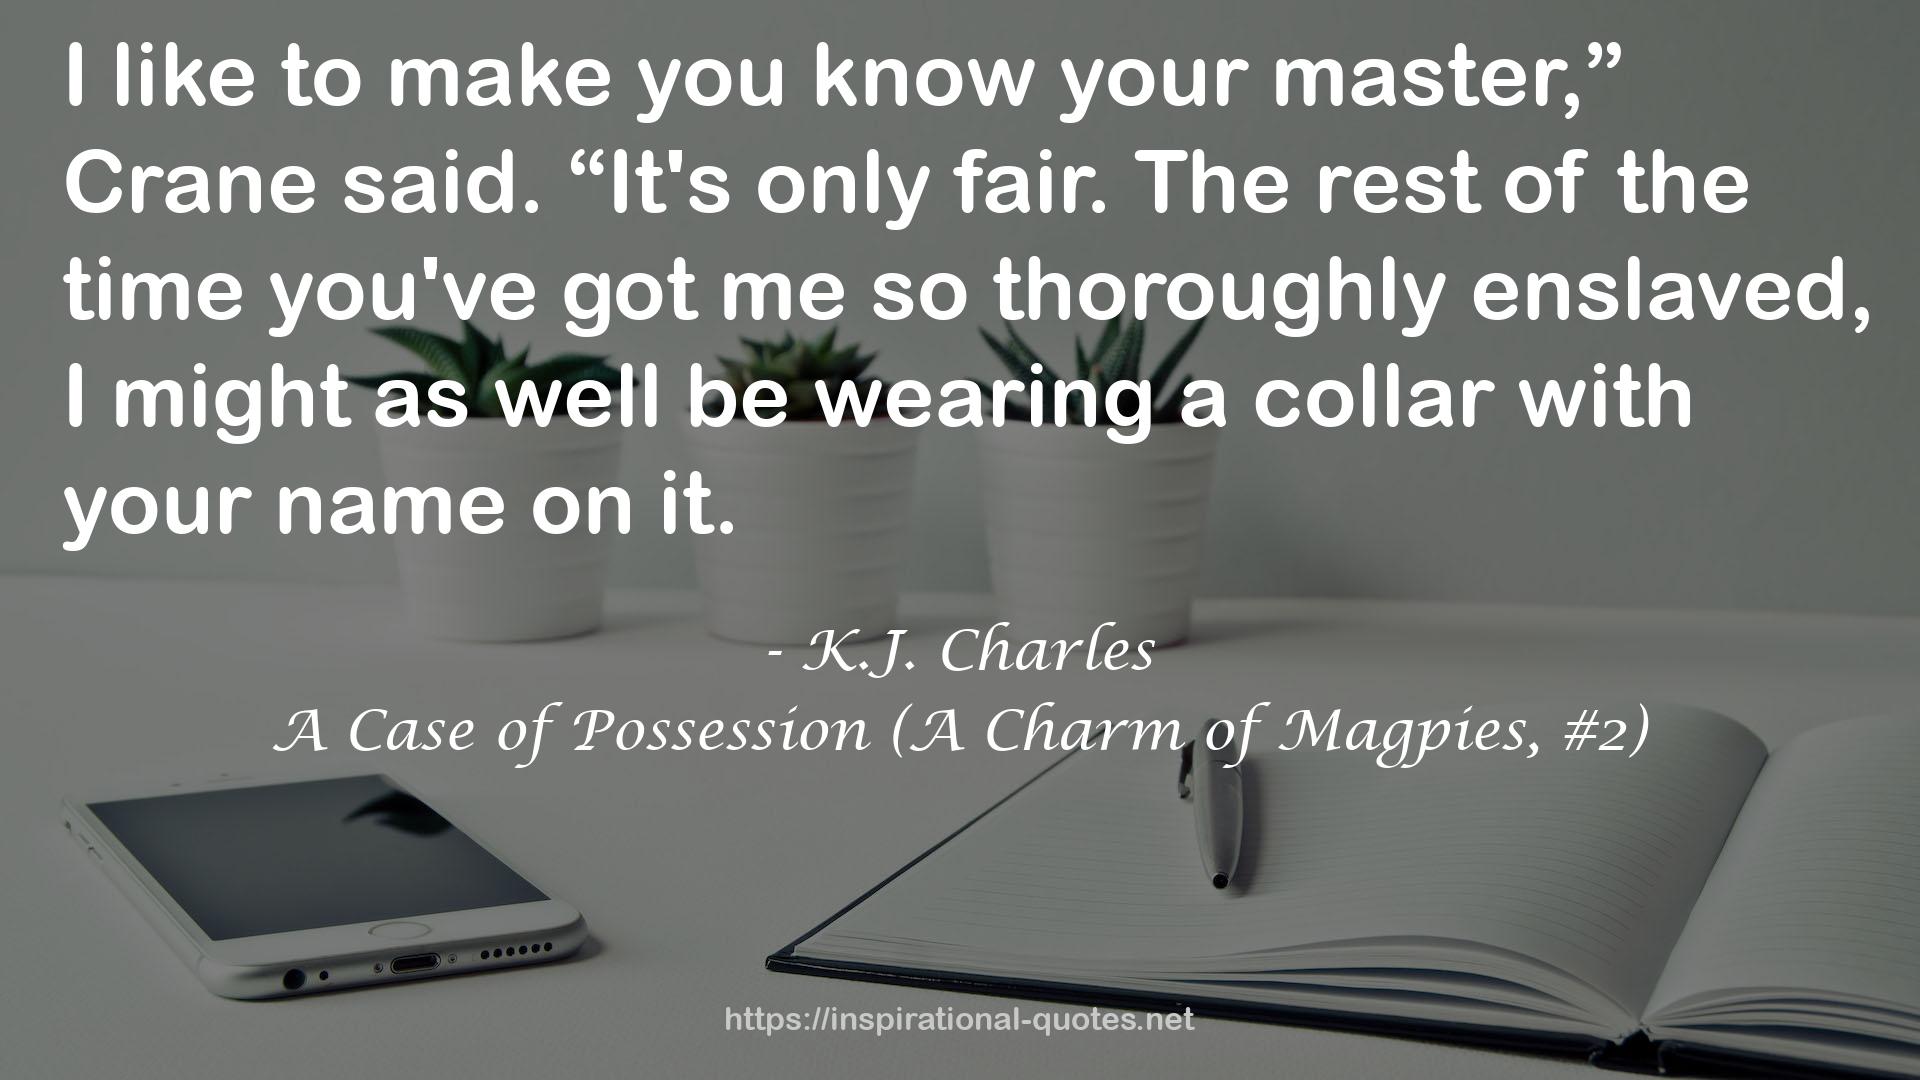 A Case of Possession (A Charm of Magpies, #2) QUOTES